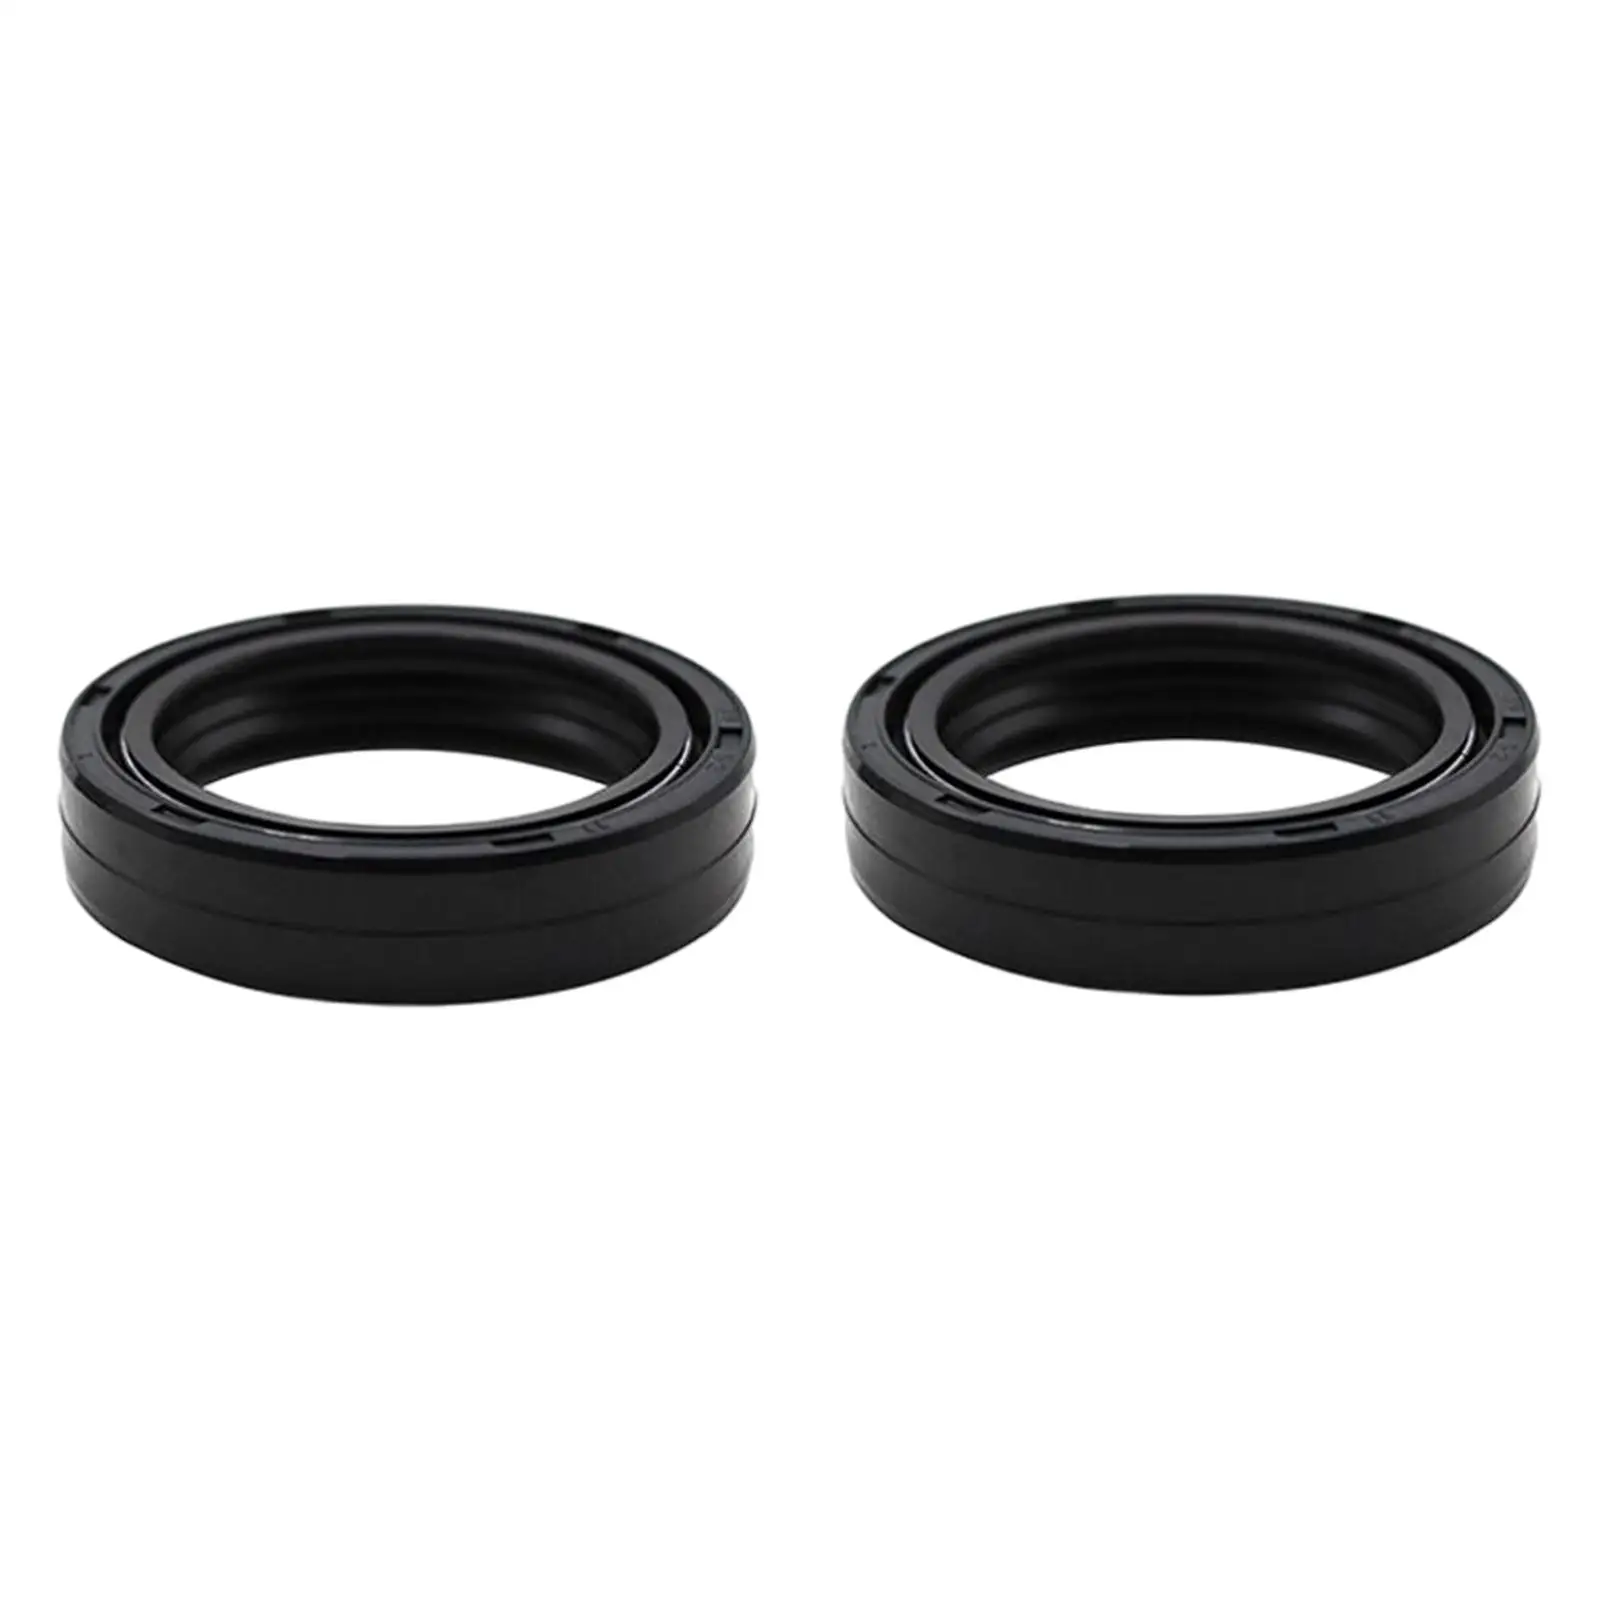 

2x Motorbike Fork Shock Absorber Oil Seal Wear Resistant Sturdy Front Damper Oil Dust Seal for Honda CB750 Upgrade Replaces